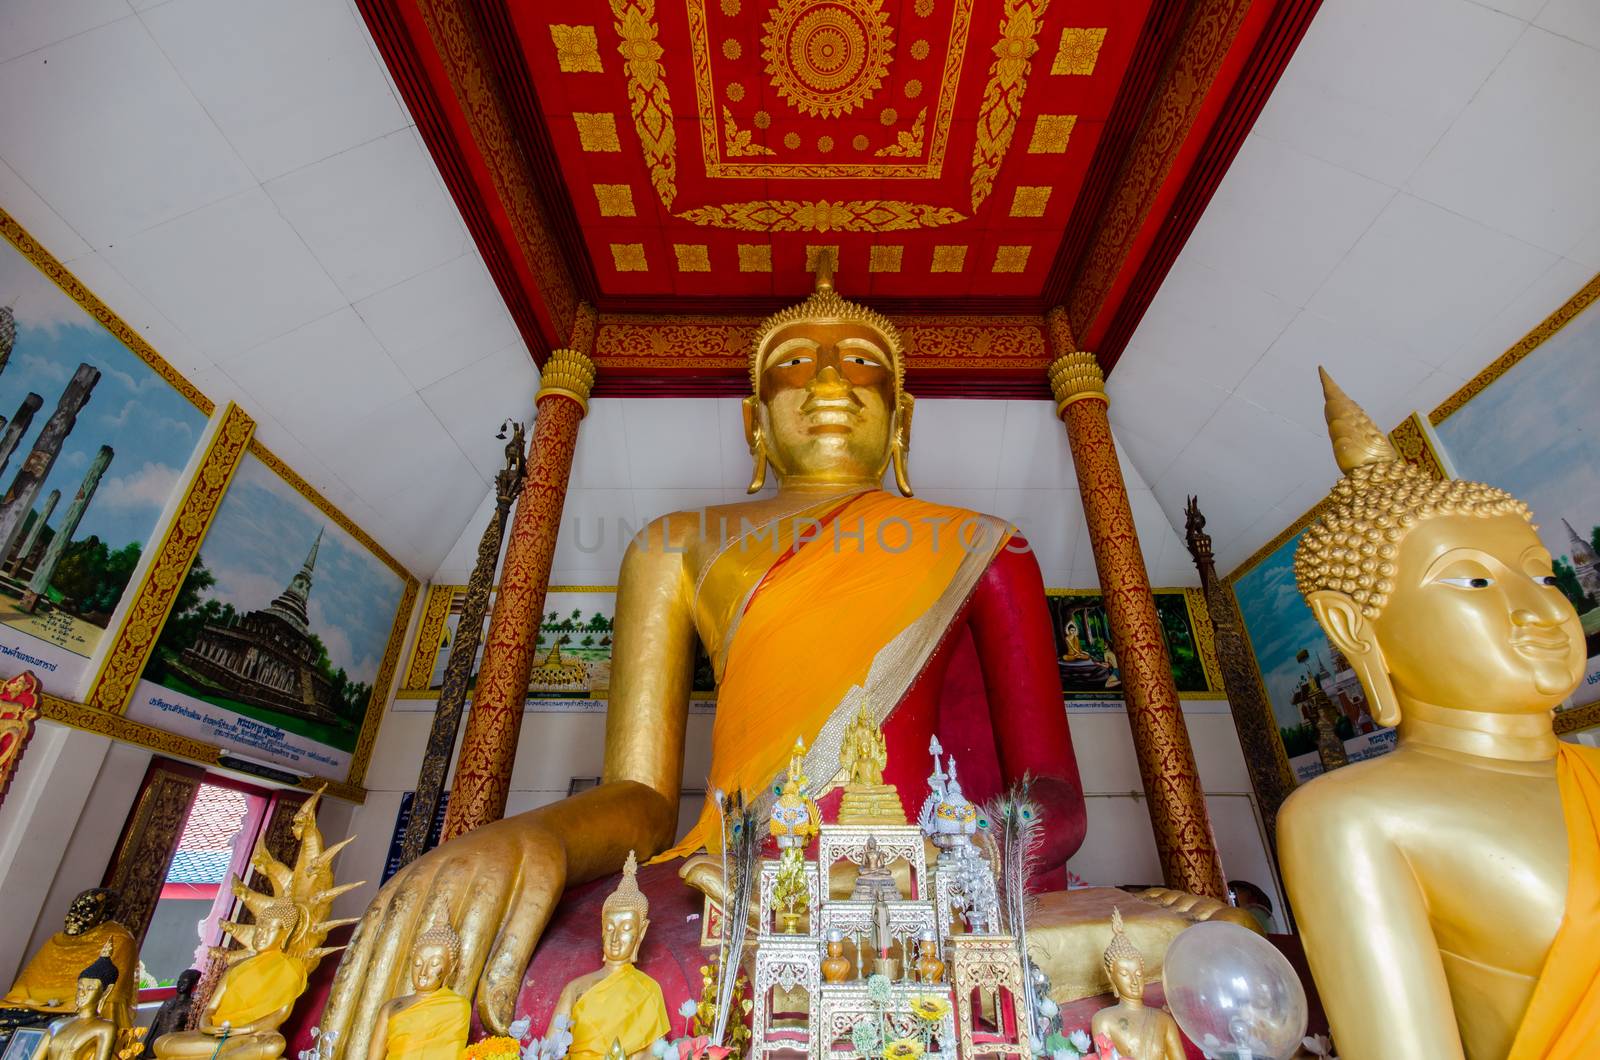 Red is the worship of the god in Lamphun.